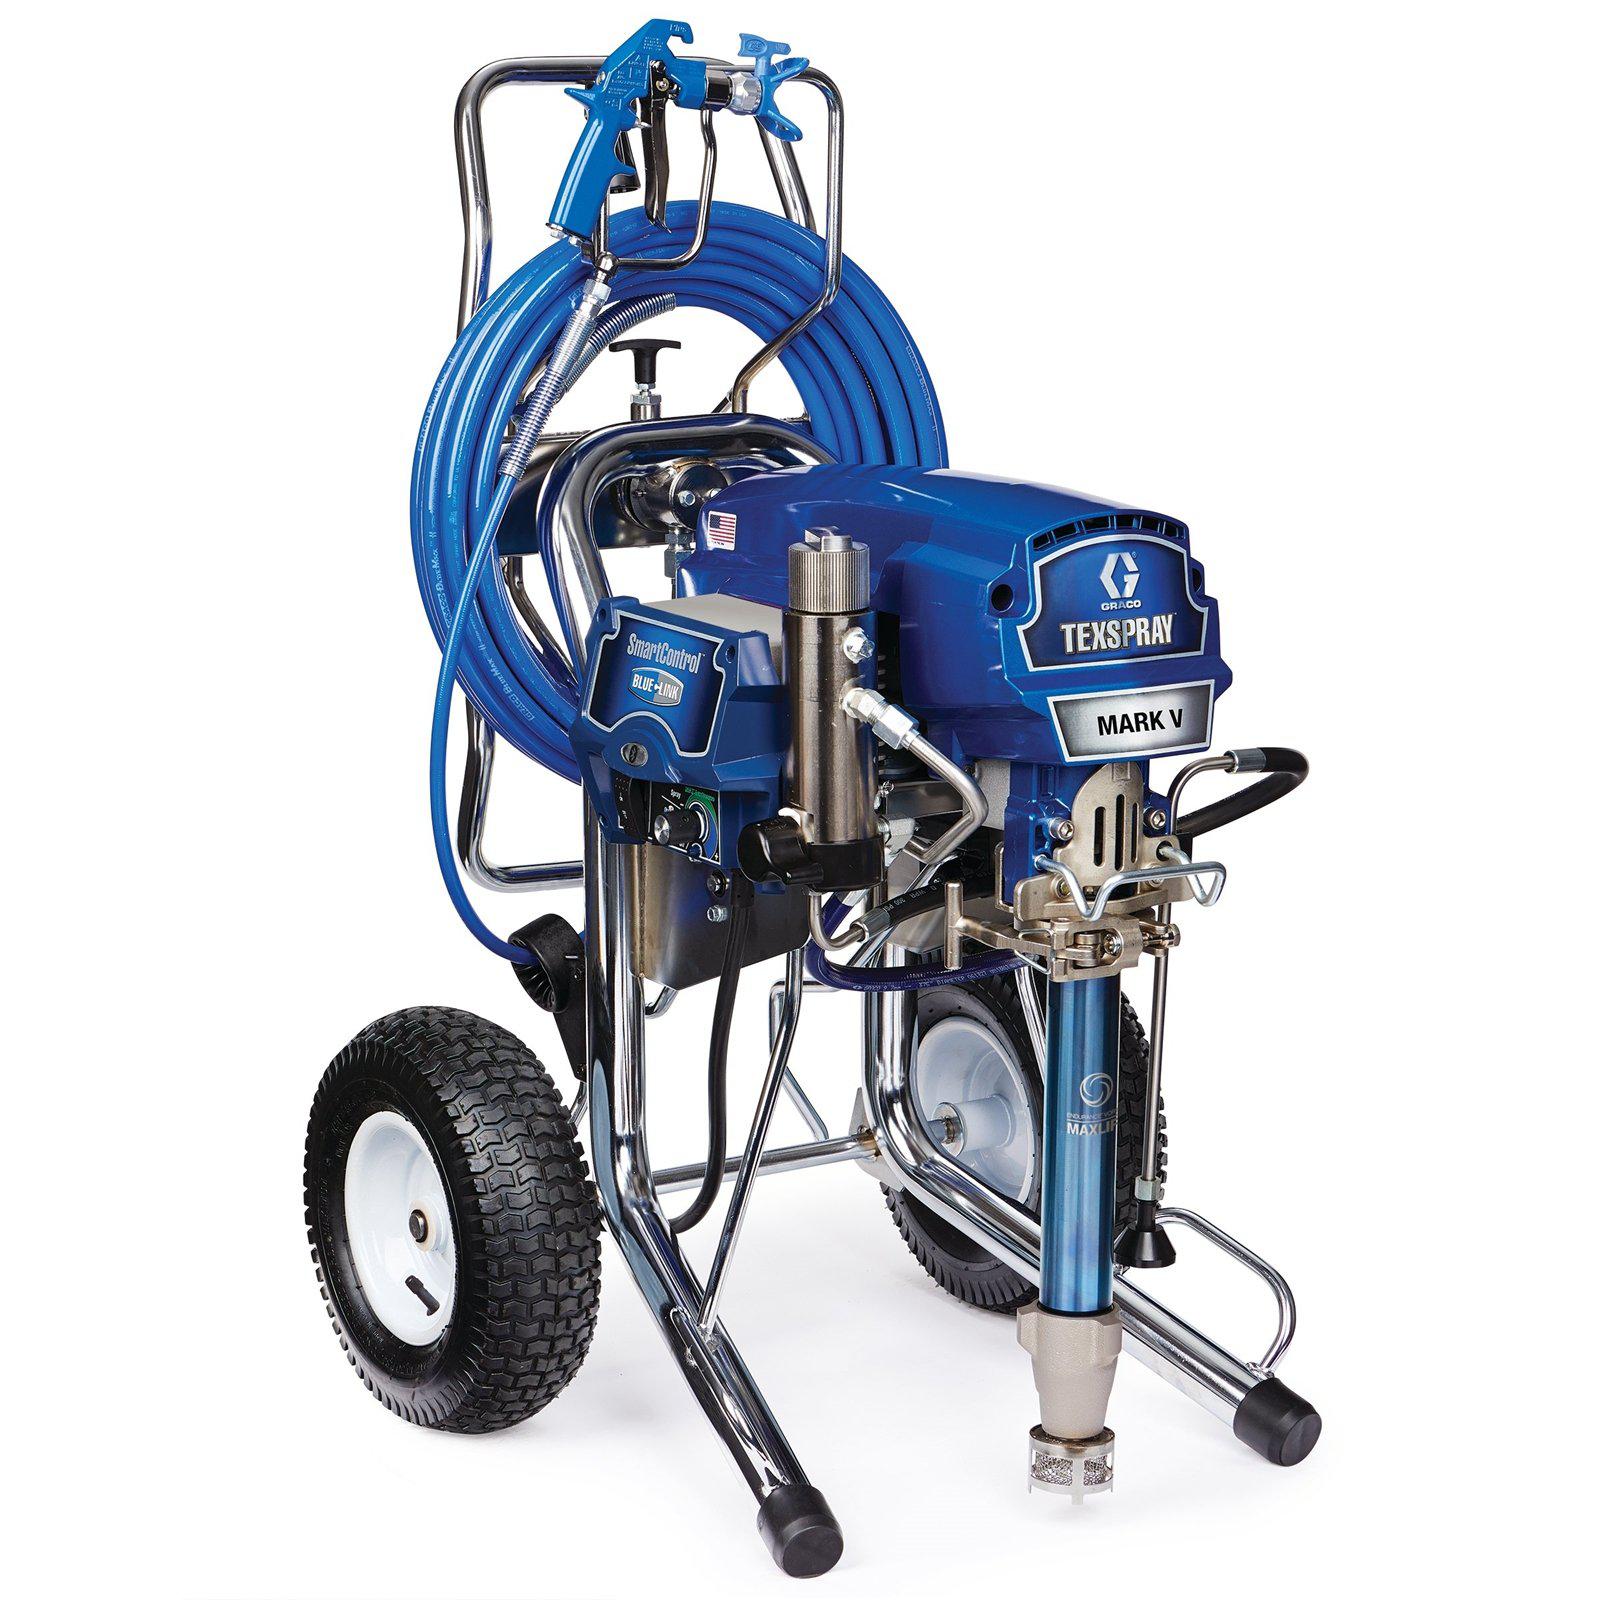 Graco Airless Spray Rig - tools - by owner - sale - craigslist